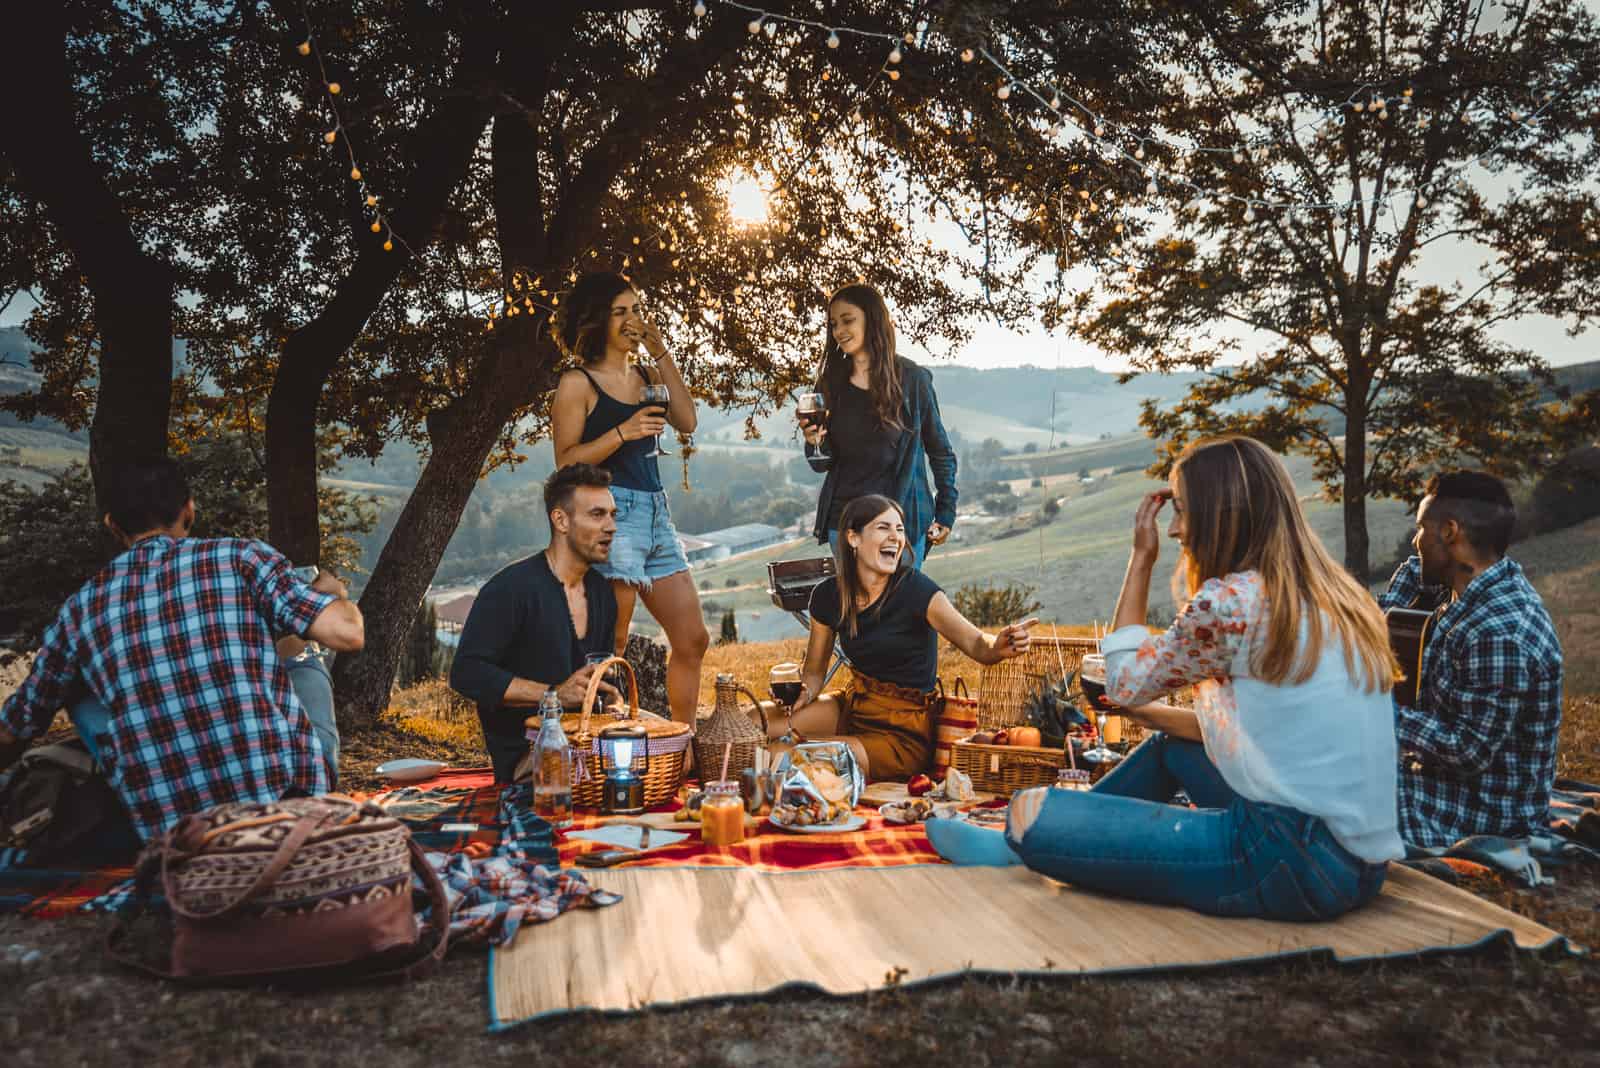 70 Best Picnic Quotes, Captions, And Puns